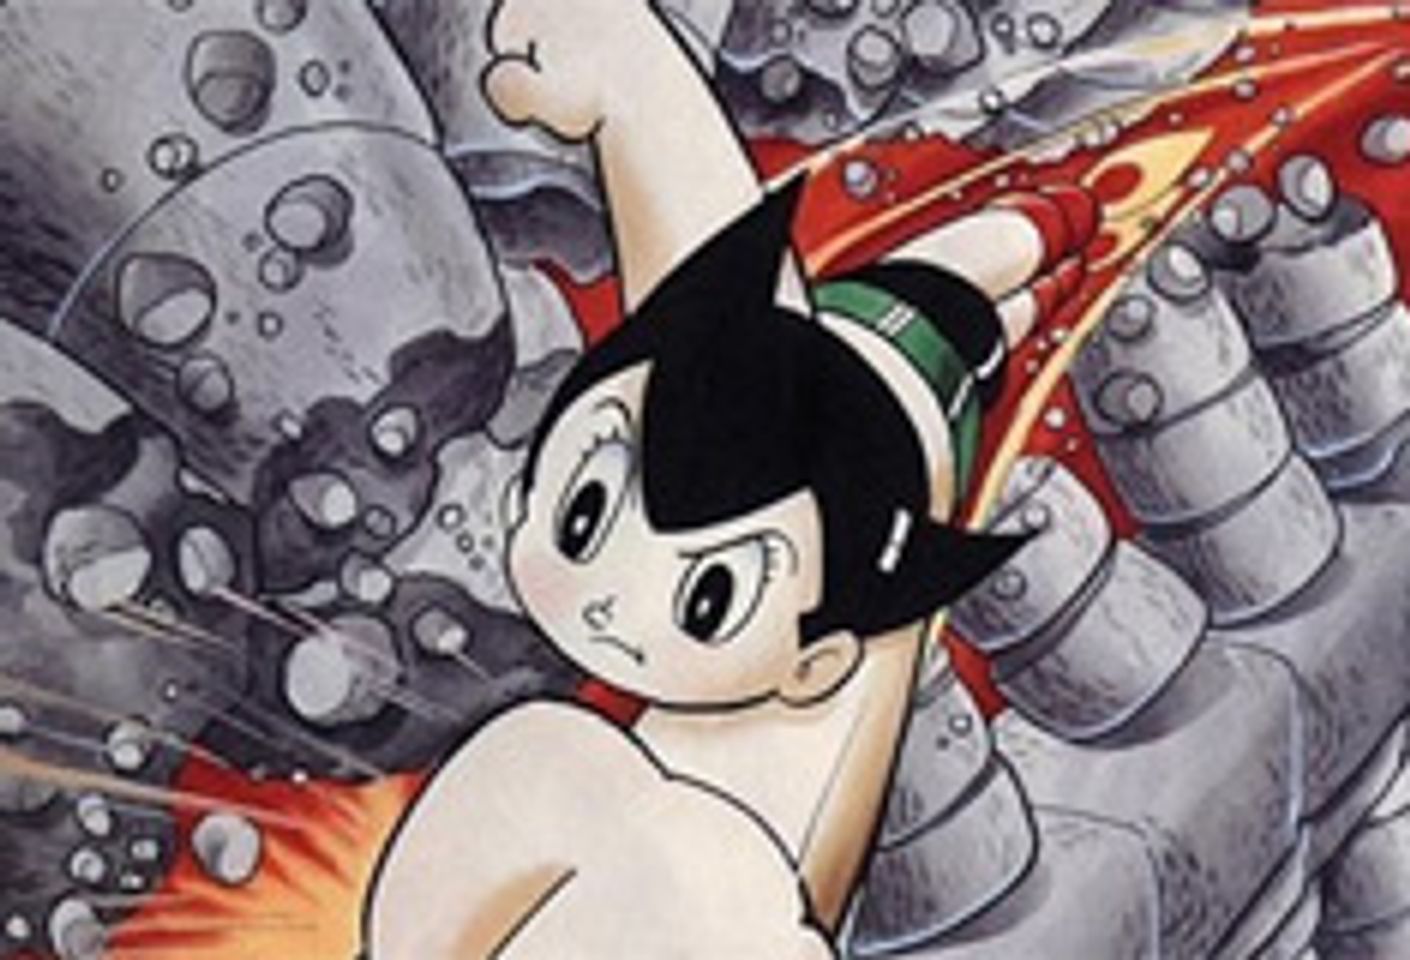 Japanese Manga History Book Pulled from Library